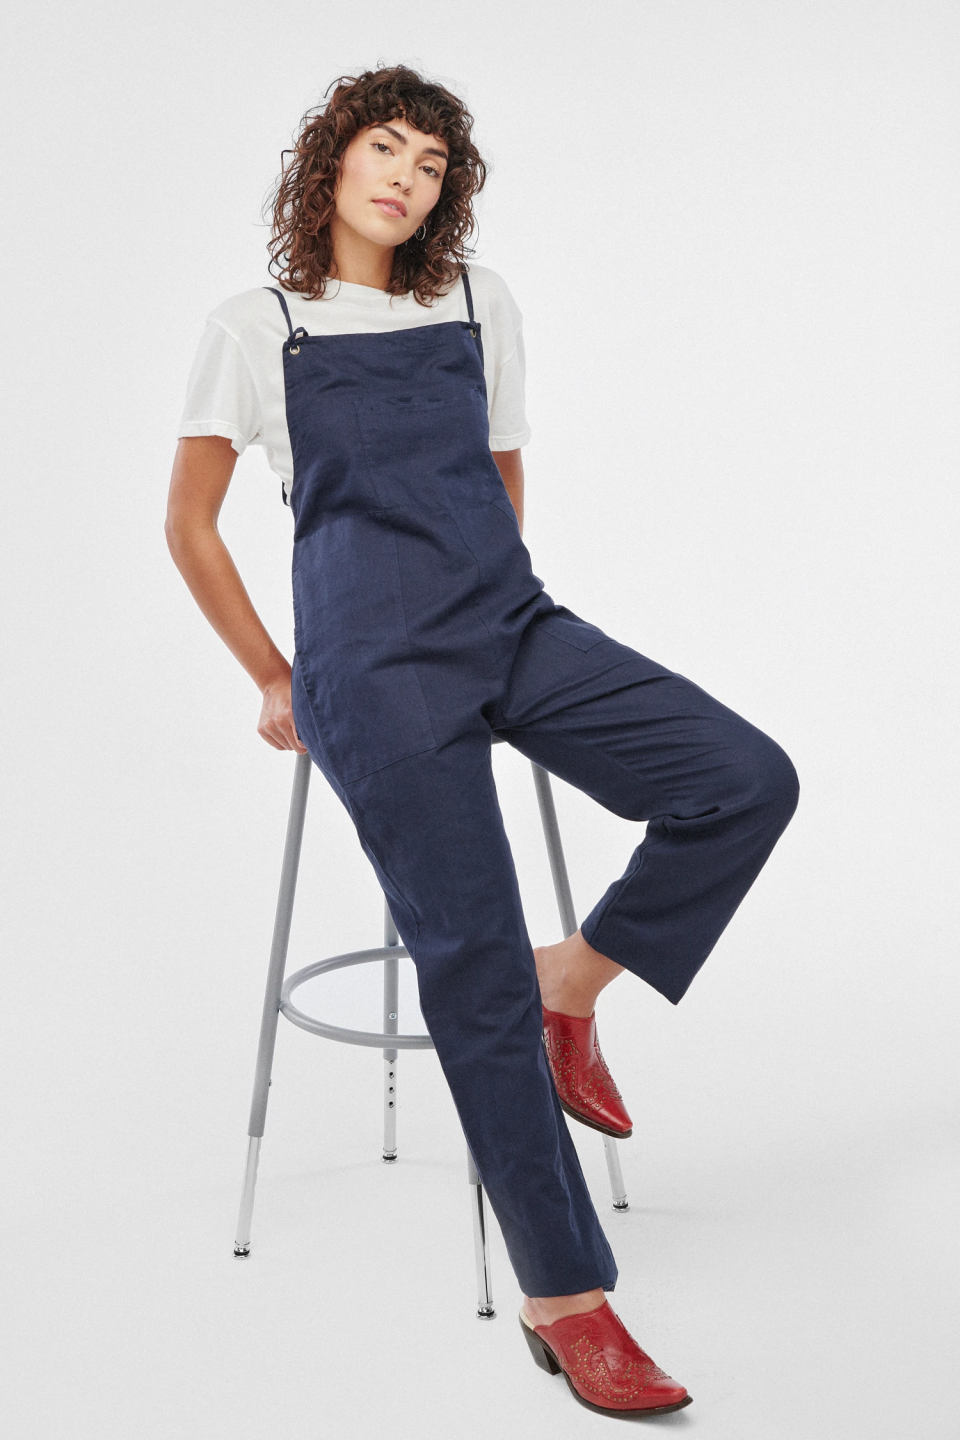 <h2>LACAUSA Cézanne Overalls</h2><br><strong>Size Range: XS-XL</strong><br><br><em>Shop<strong><a href="https://www.lacausaclothing.com/collections/all/products/cezanne-overalls-navy?variant=7381320368151" rel="nofollow noopener" target="_blank" data-ylk="slk:LACAUSA" class="link "> LACAUSA</a></strong></em><br><br><strong>Cézanne</strong> Cézanne Overalls, $, available at <a href="https://go.skimresources.com/?id=30283X879131&url=https%3A%2F%2Fwww.lacausaclothing.com%2Fcollections%2Fall%2Fproducts%2Fcezanne-overalls-navy%3Fvariant%3D7381320368151" rel="nofollow noopener" target="_blank" data-ylk="slk:LACAUSA" class="link ">LACAUSA</a>